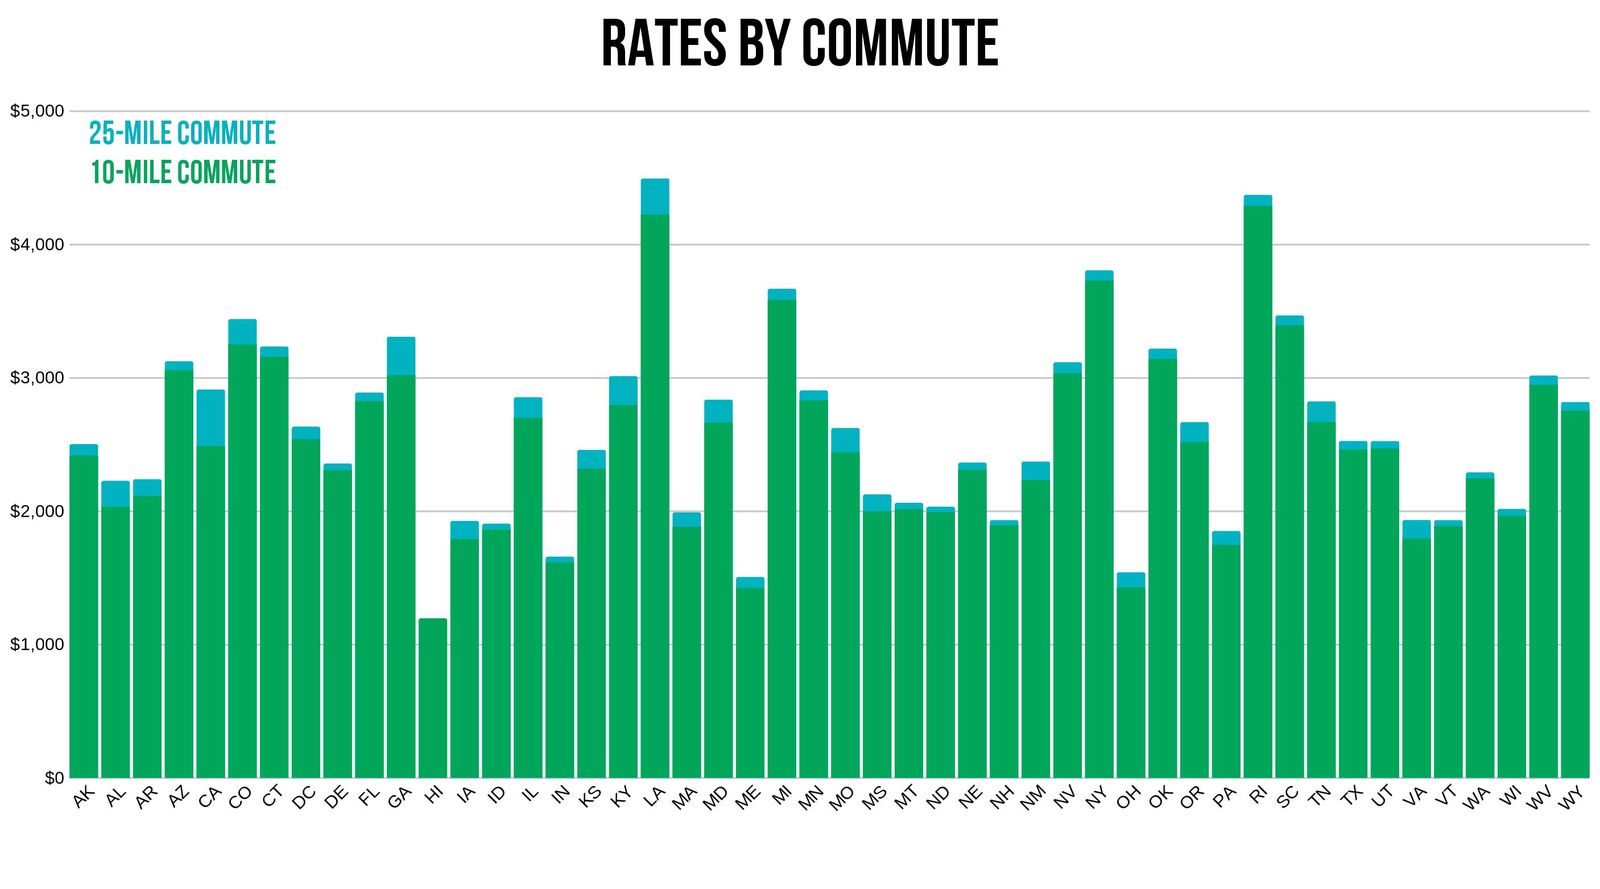 USAA rates depending on commute distance